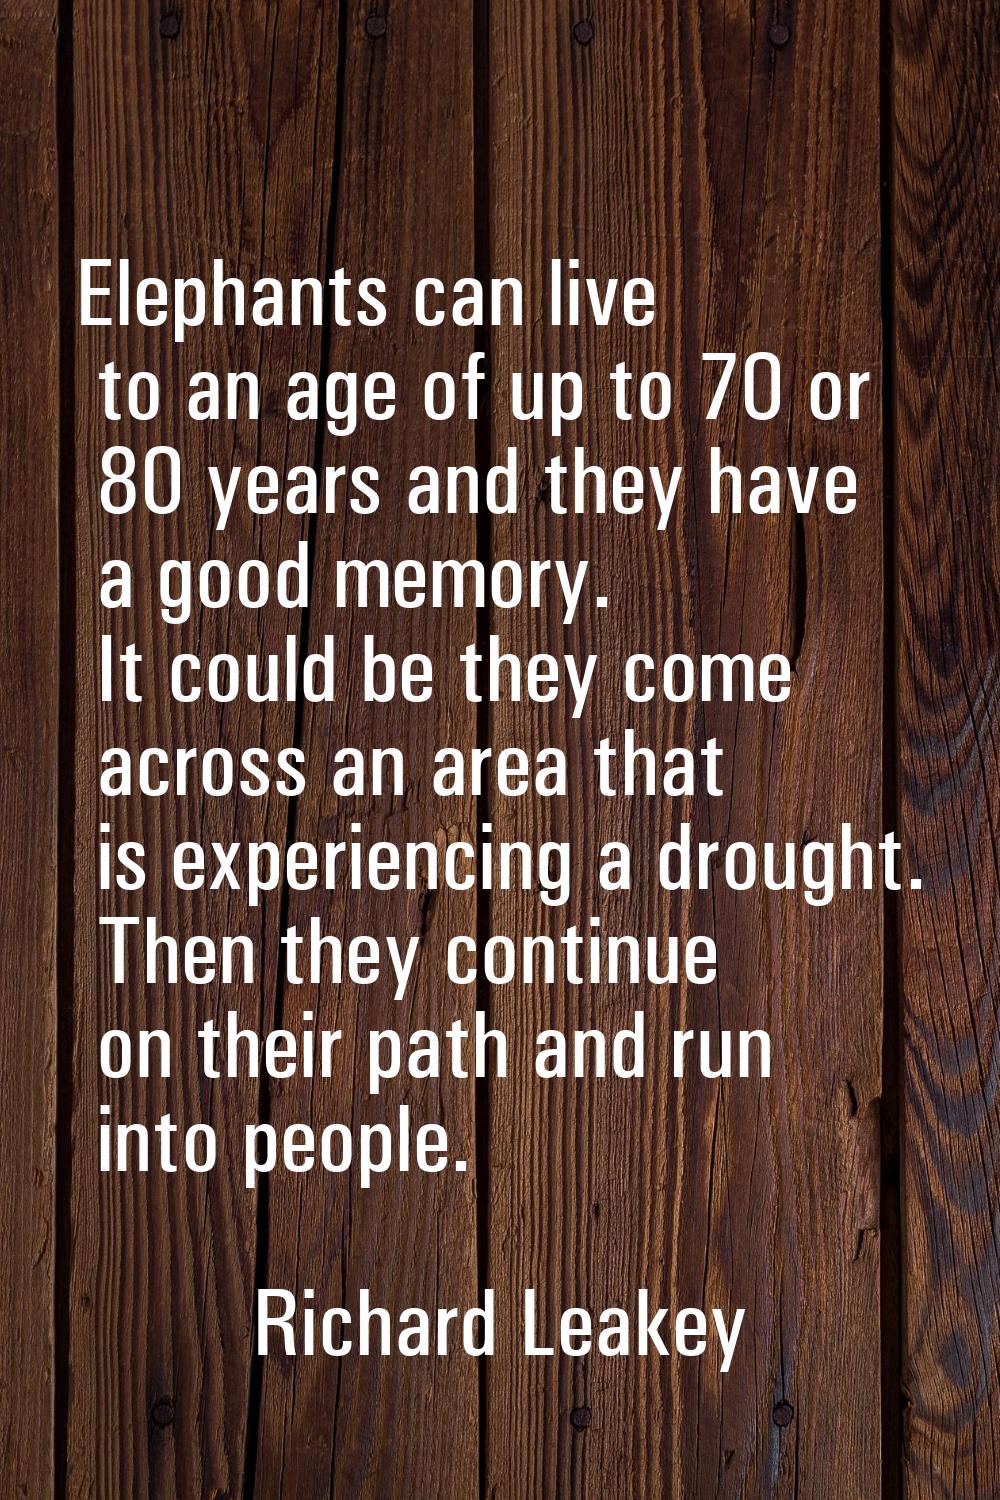 Elephants can live to an age of up to 70 or 80 years and they have a good memory. It could be they 